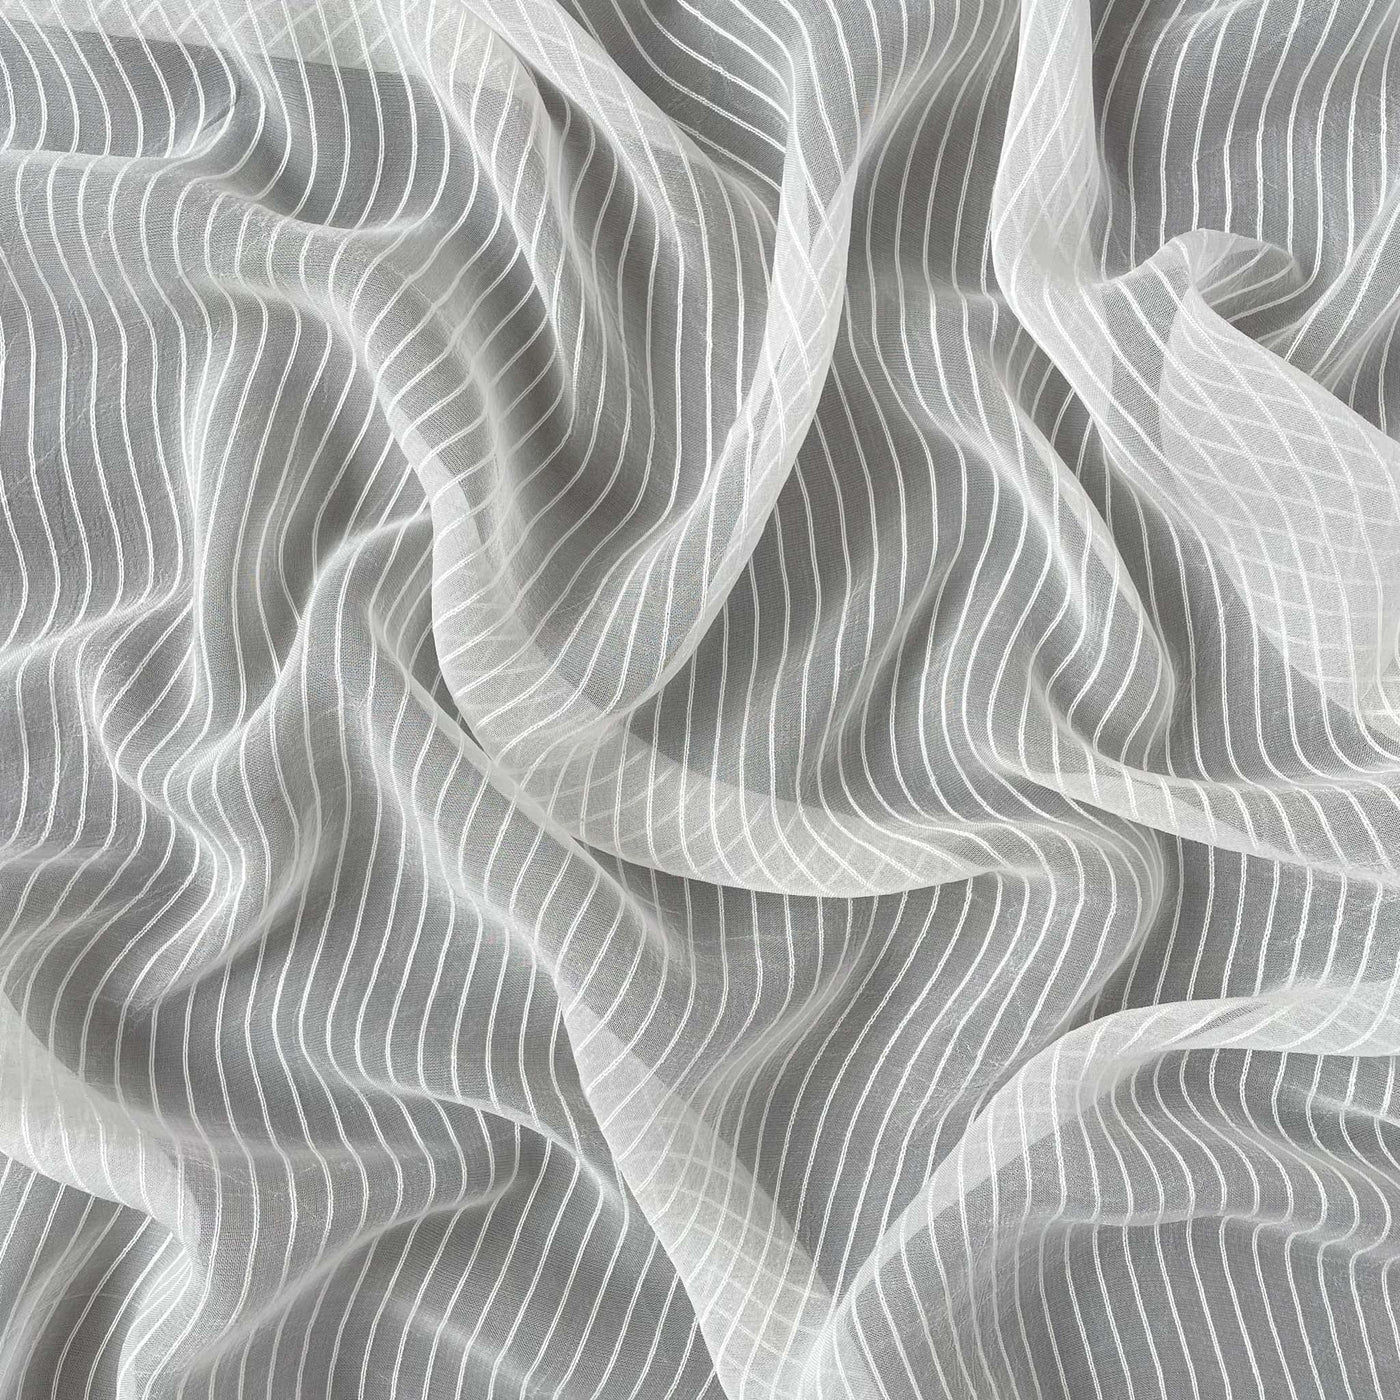 Dyeable Fabric Cut Piece 1 MTR (CUT PIECE) White Dyeable Pure Viscose Georgette Dobby Single Stripes Fabric (Width 48 Inches, 63 Gms)